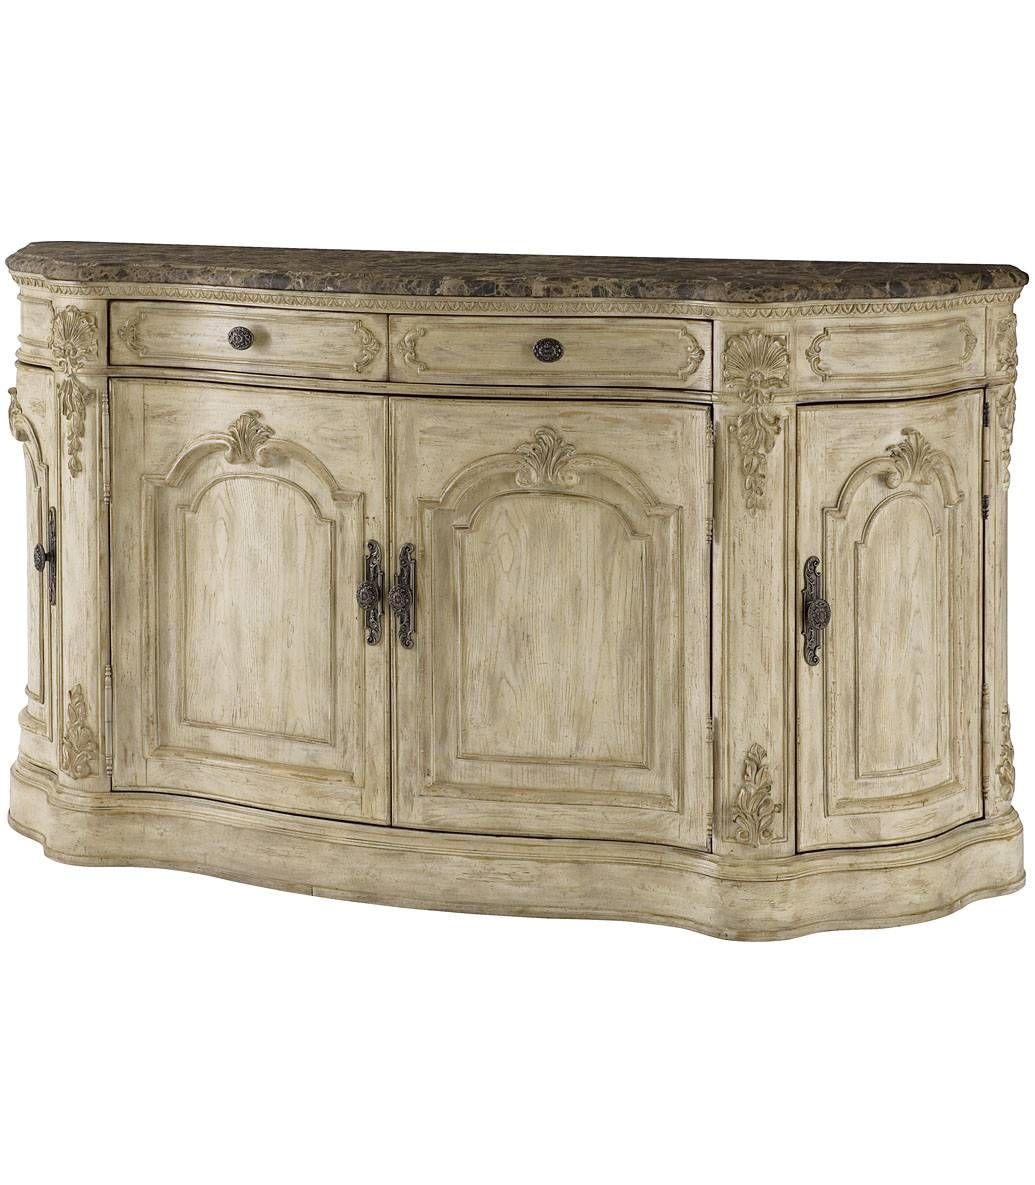 Antique French Country Dinette Decor With Adjustable Shelf Buffet Within Most Current Marble Top Sideboards (View 12 of 15)